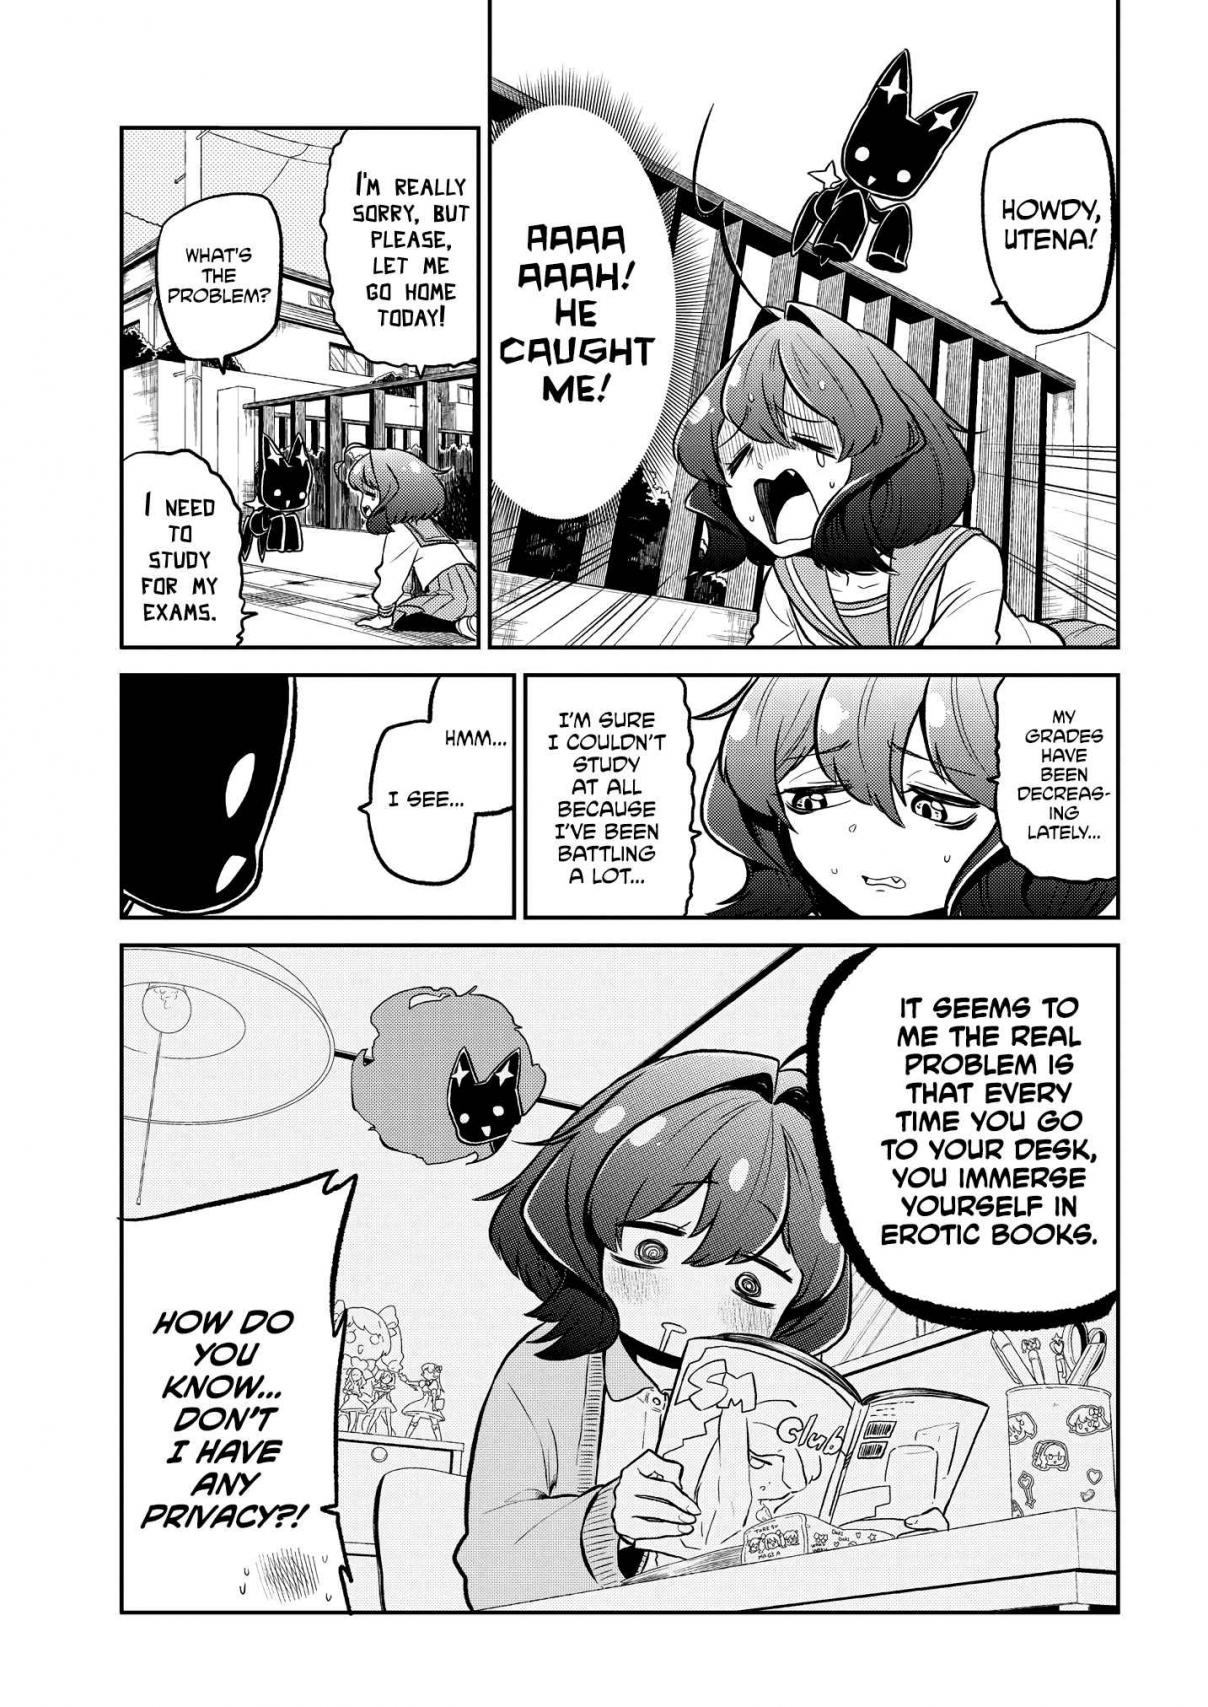 Looking Up To Magical Girls Vol. 1 Ch. 6